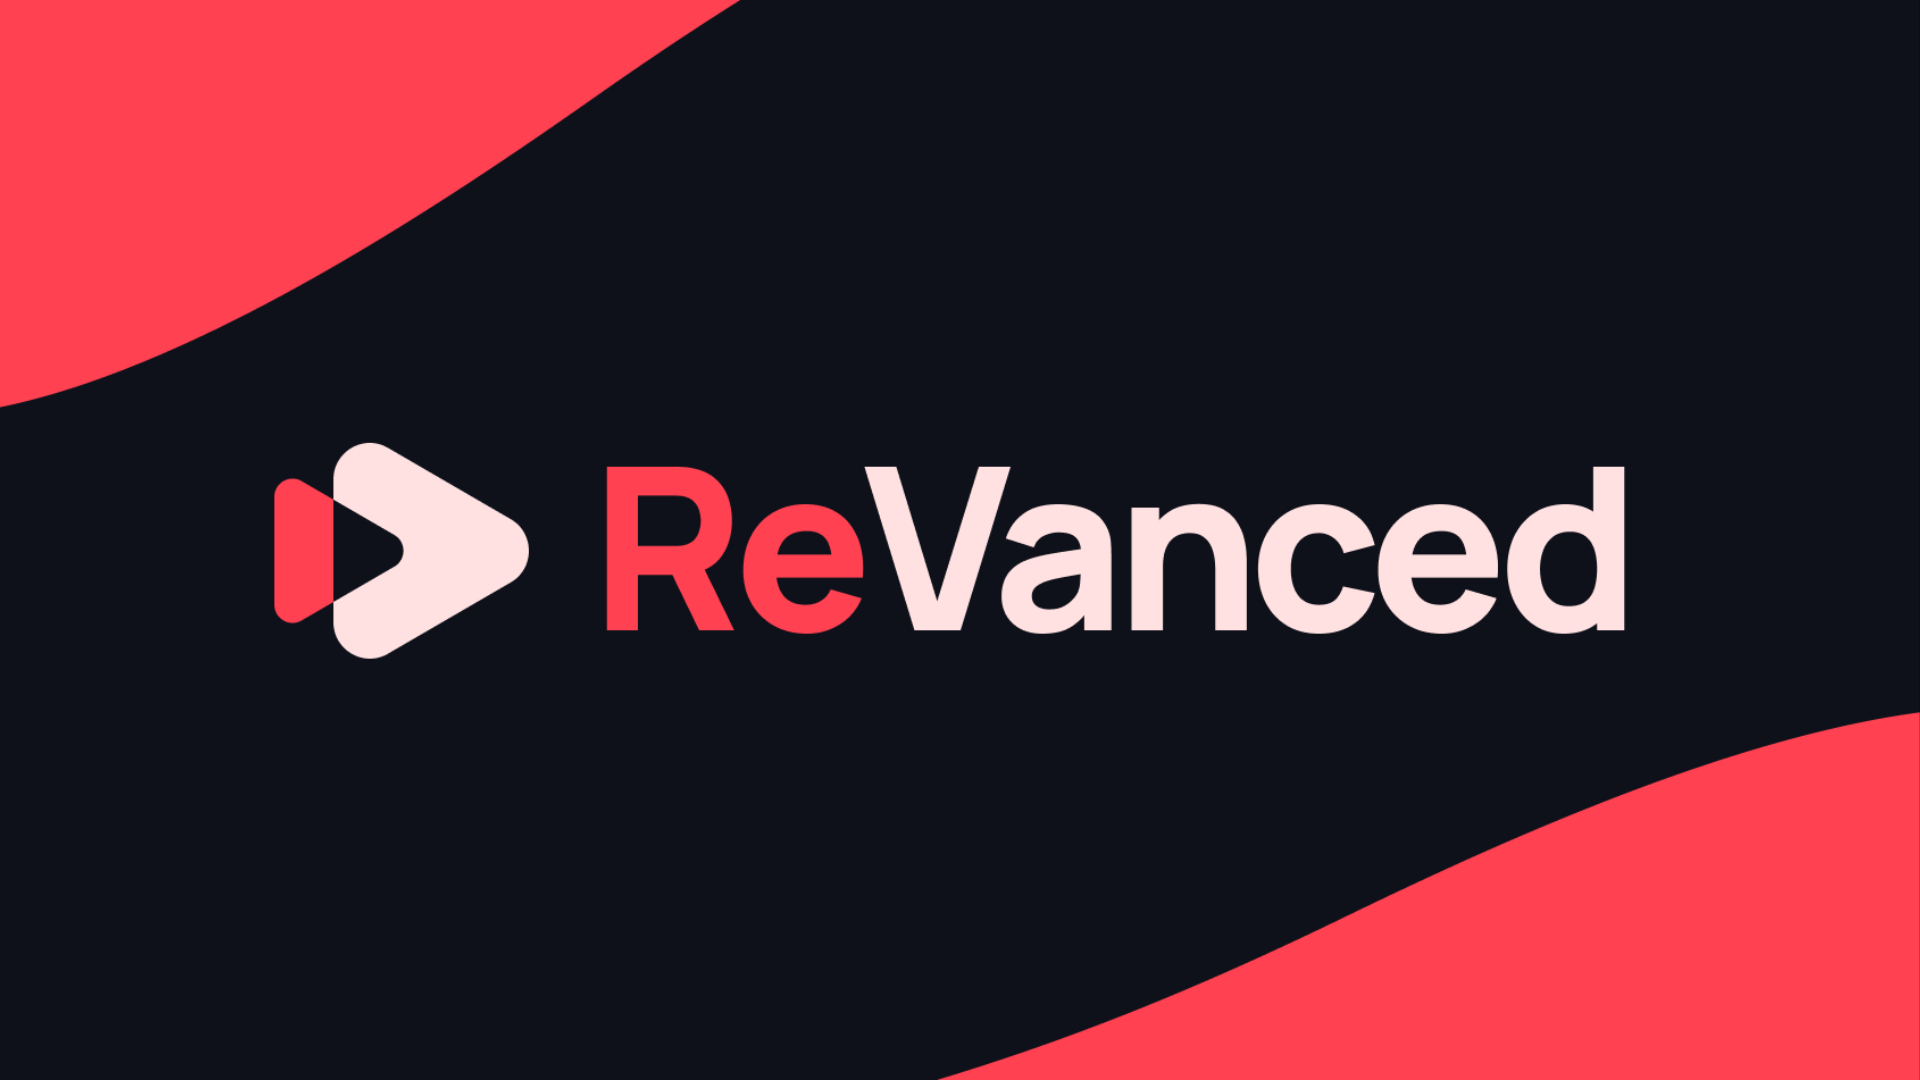 How to Download ReVanced Extended Latest Version on Android